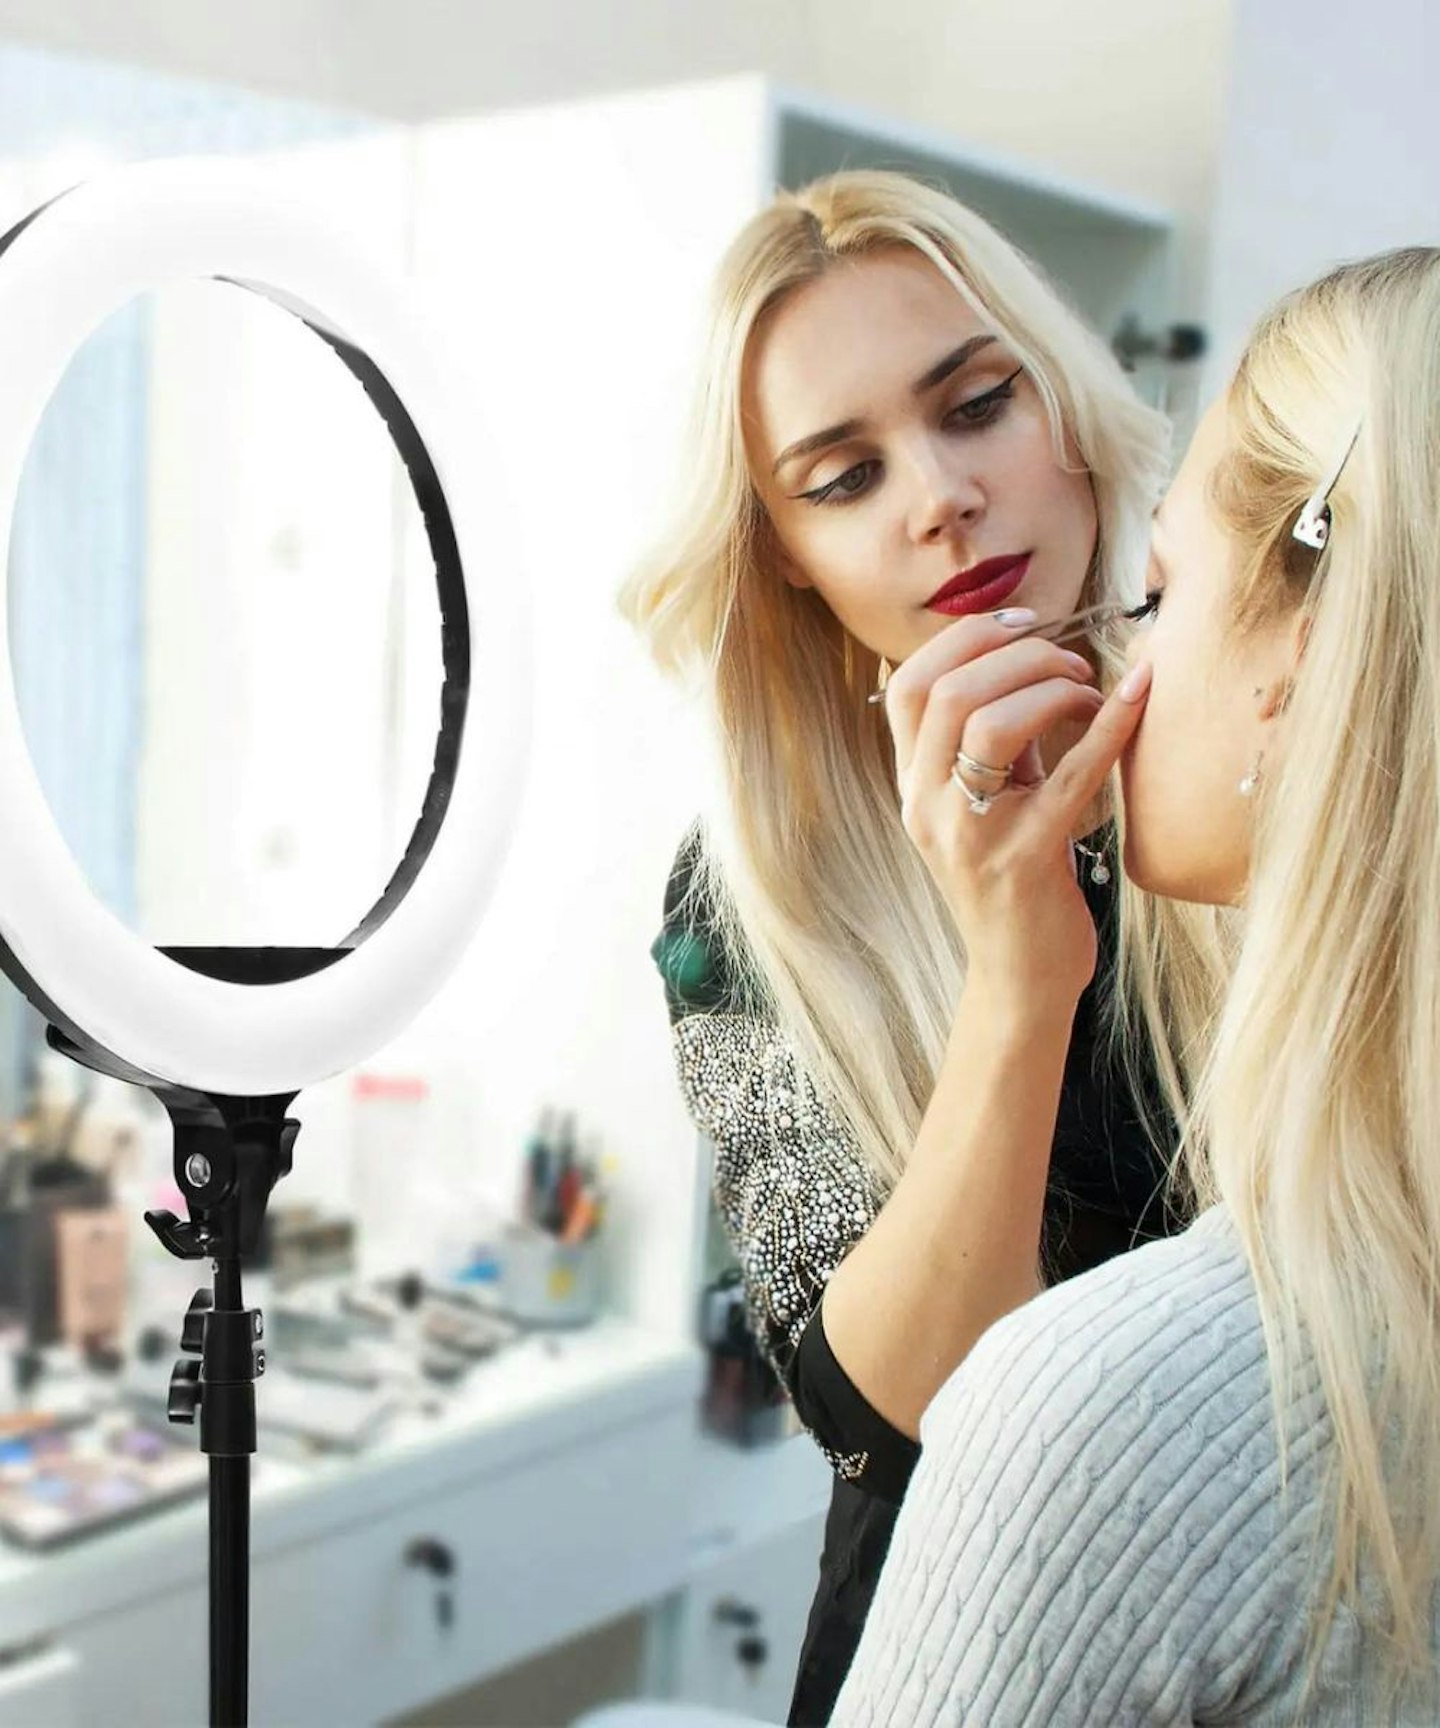 Rio Professional Makeup and Vlogging 18 Inch Dimmable LED Ring Light